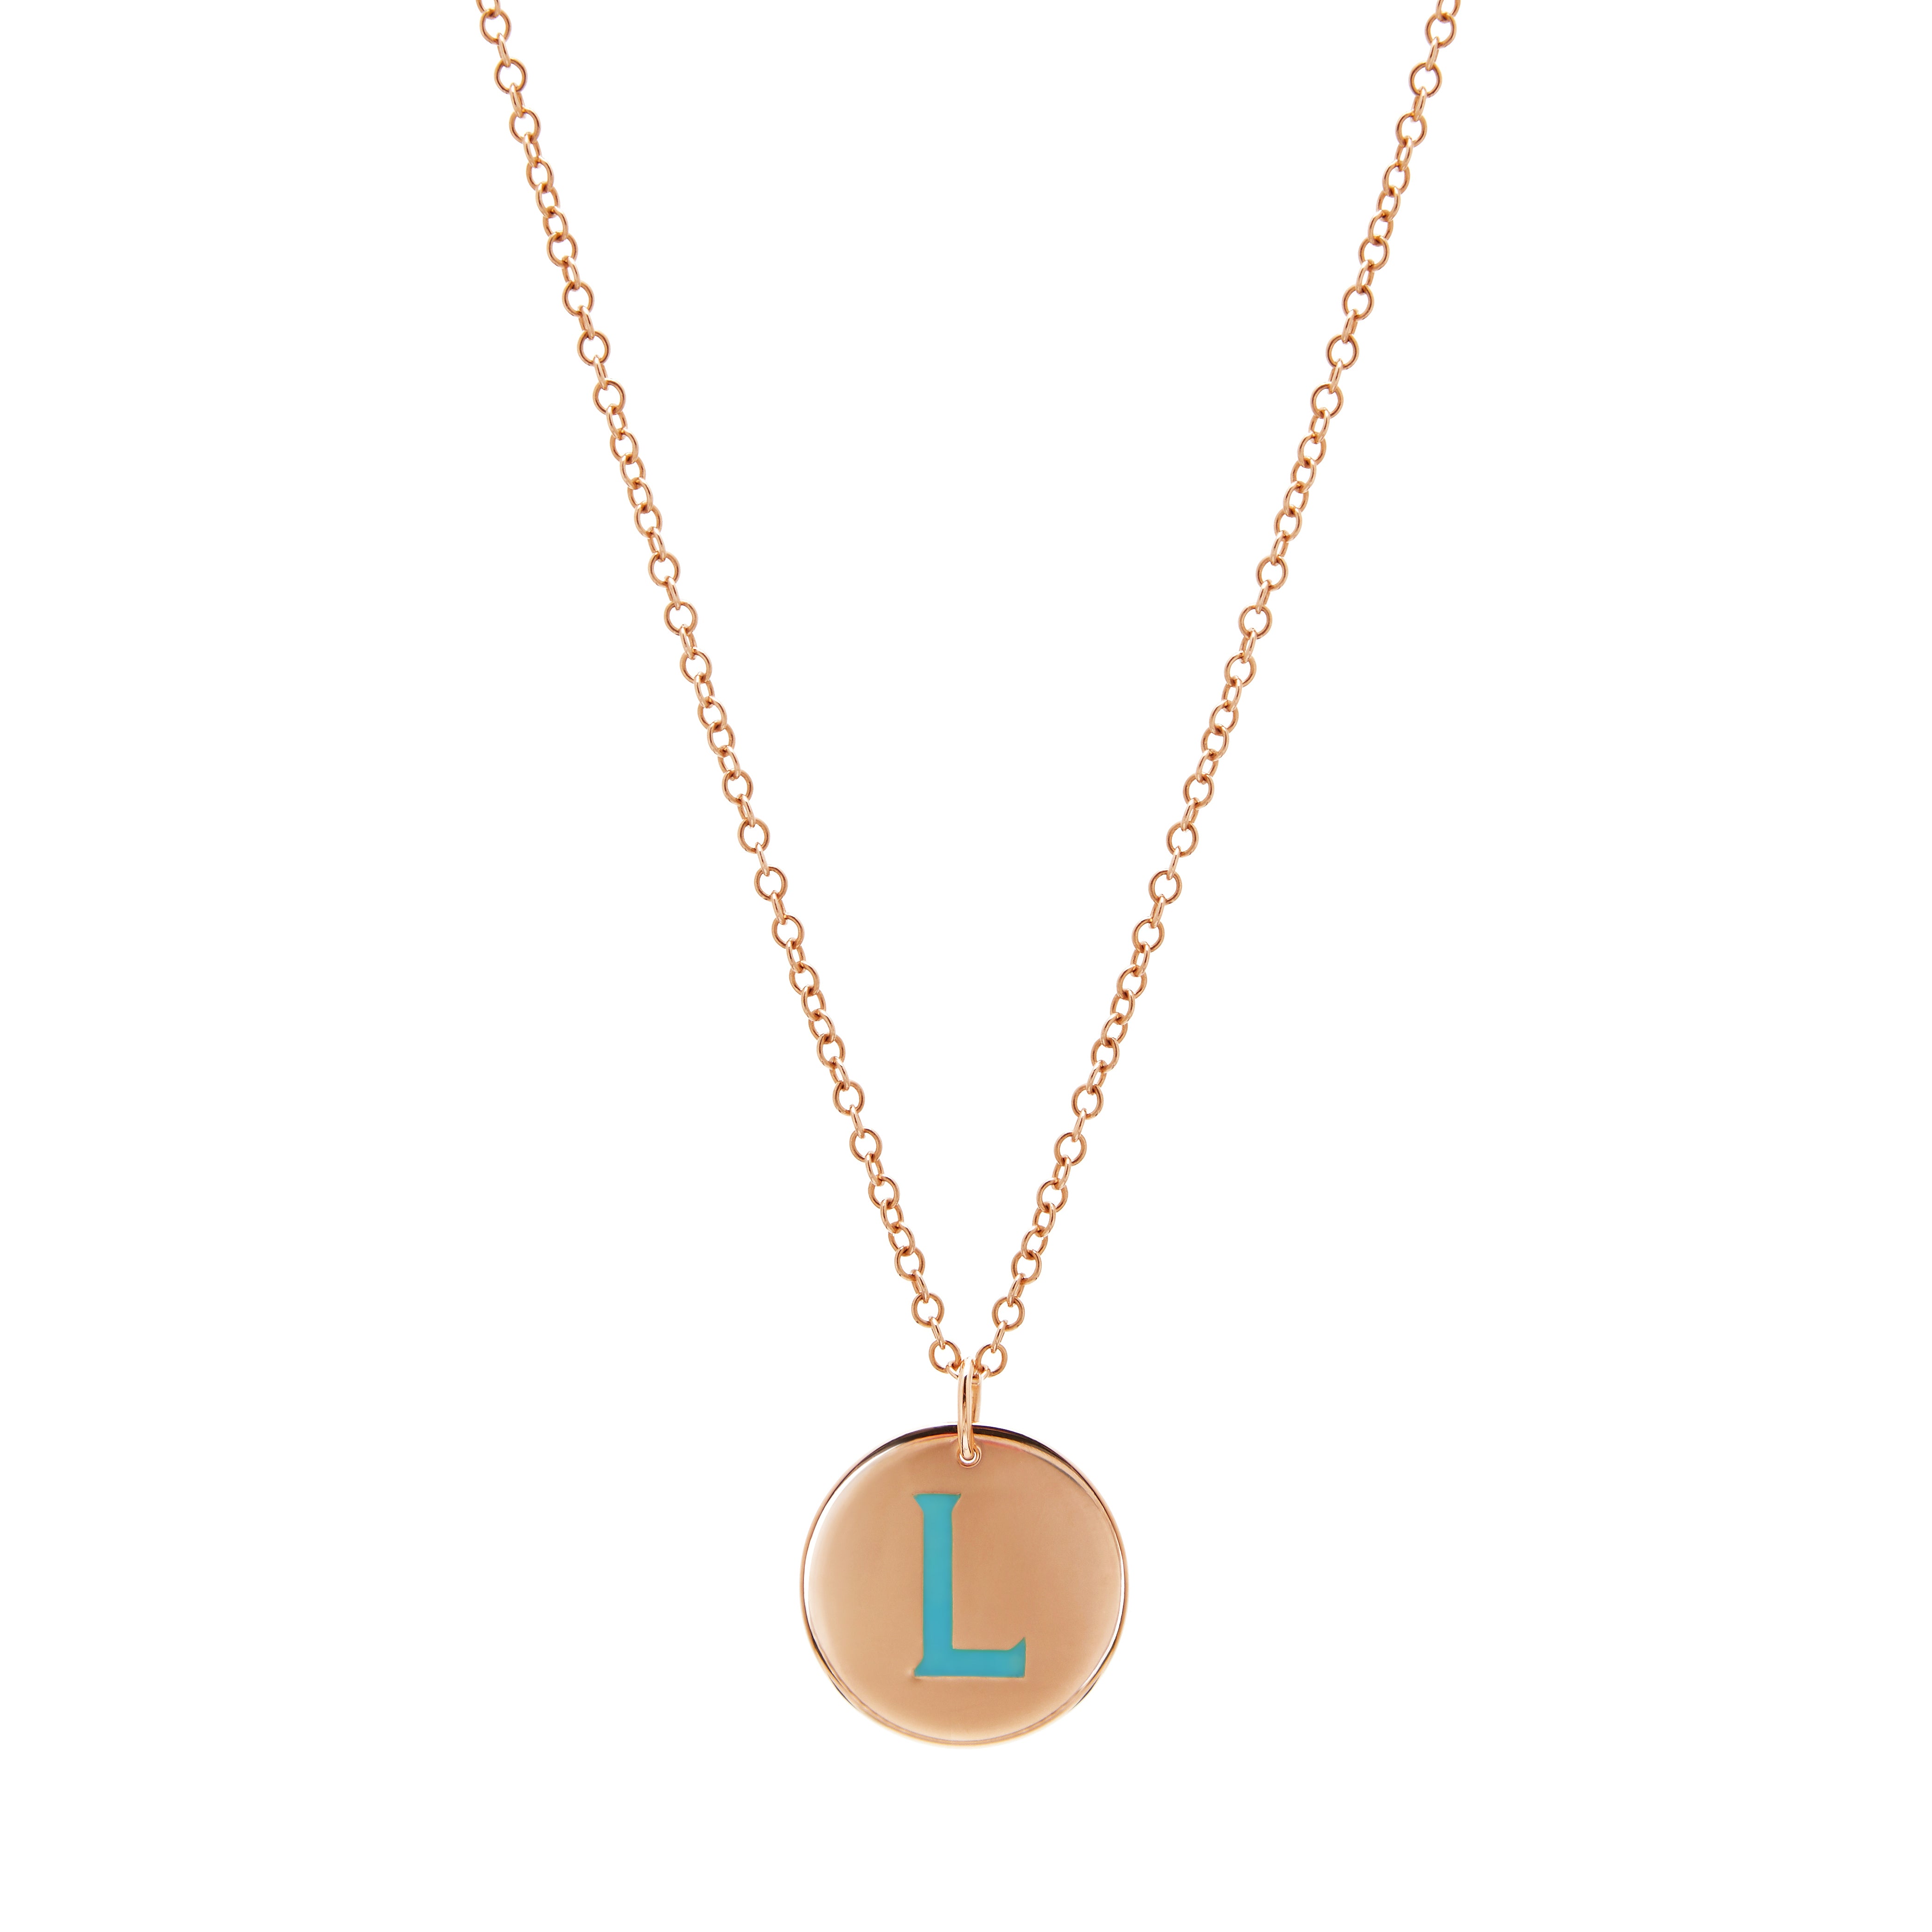 Sterling Silver and Gilt Disc Pendant with Personalised Enamelled Initial